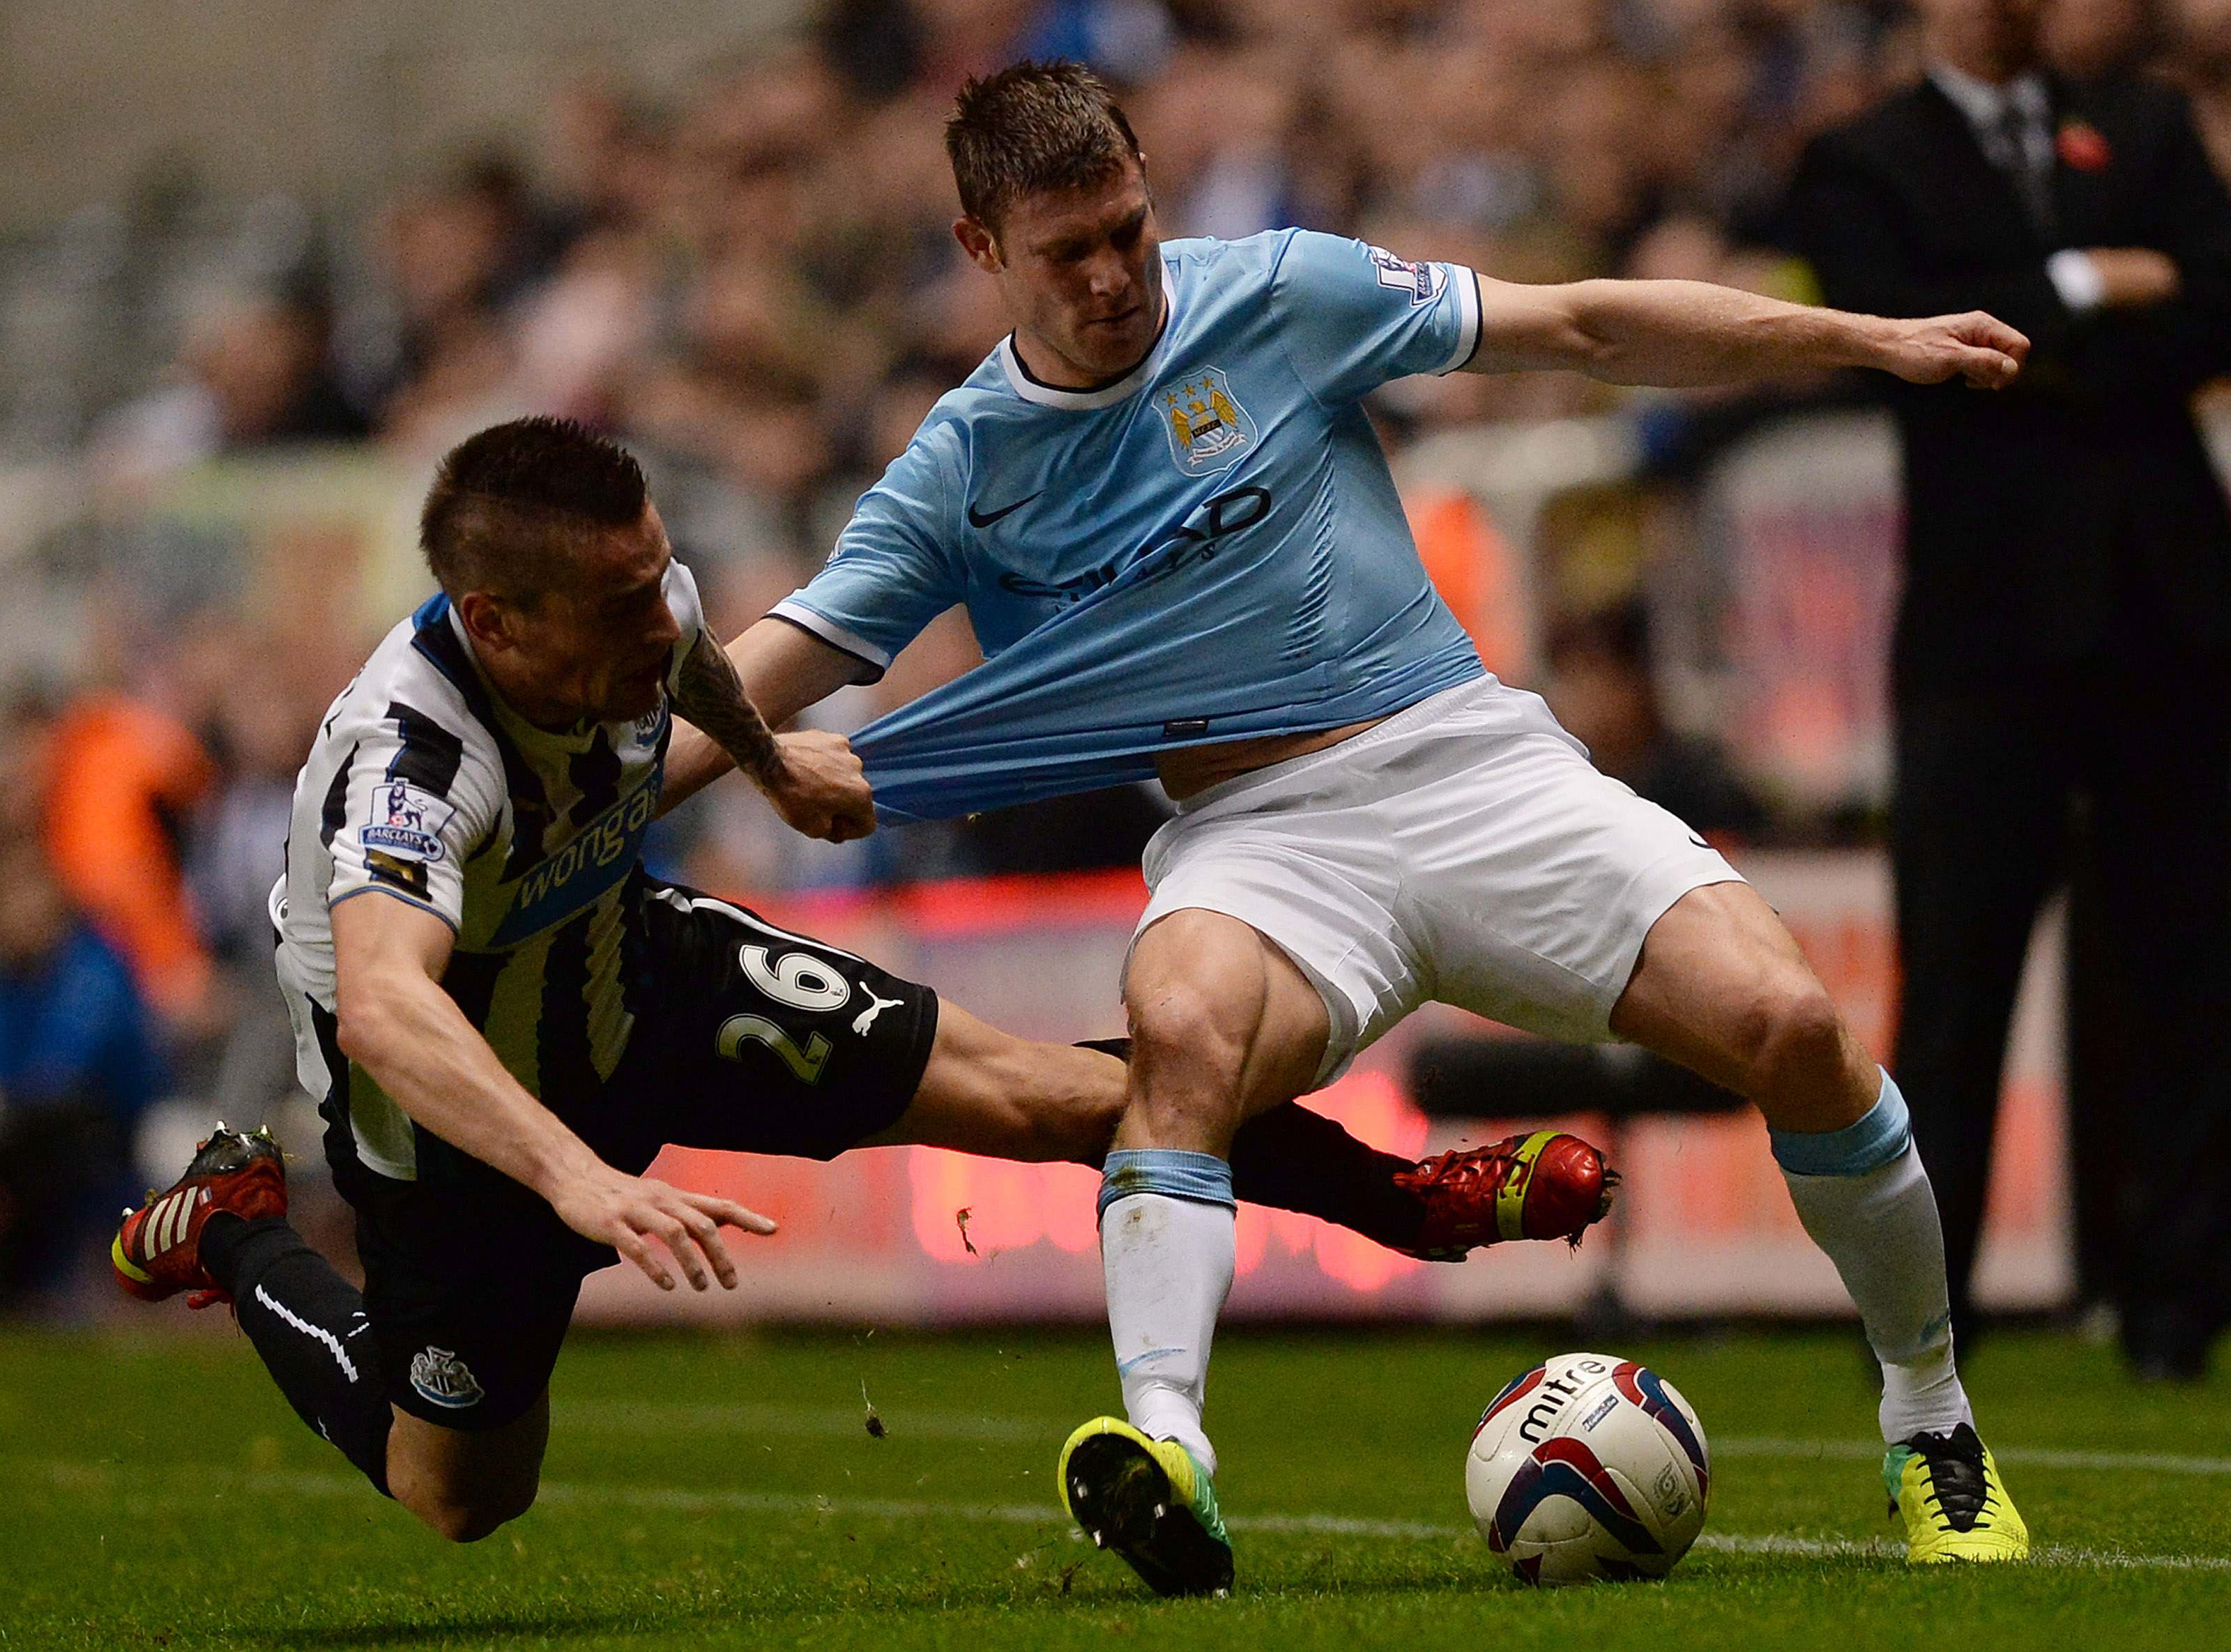 City edge Newcastle, Spurs win shootout with Hull